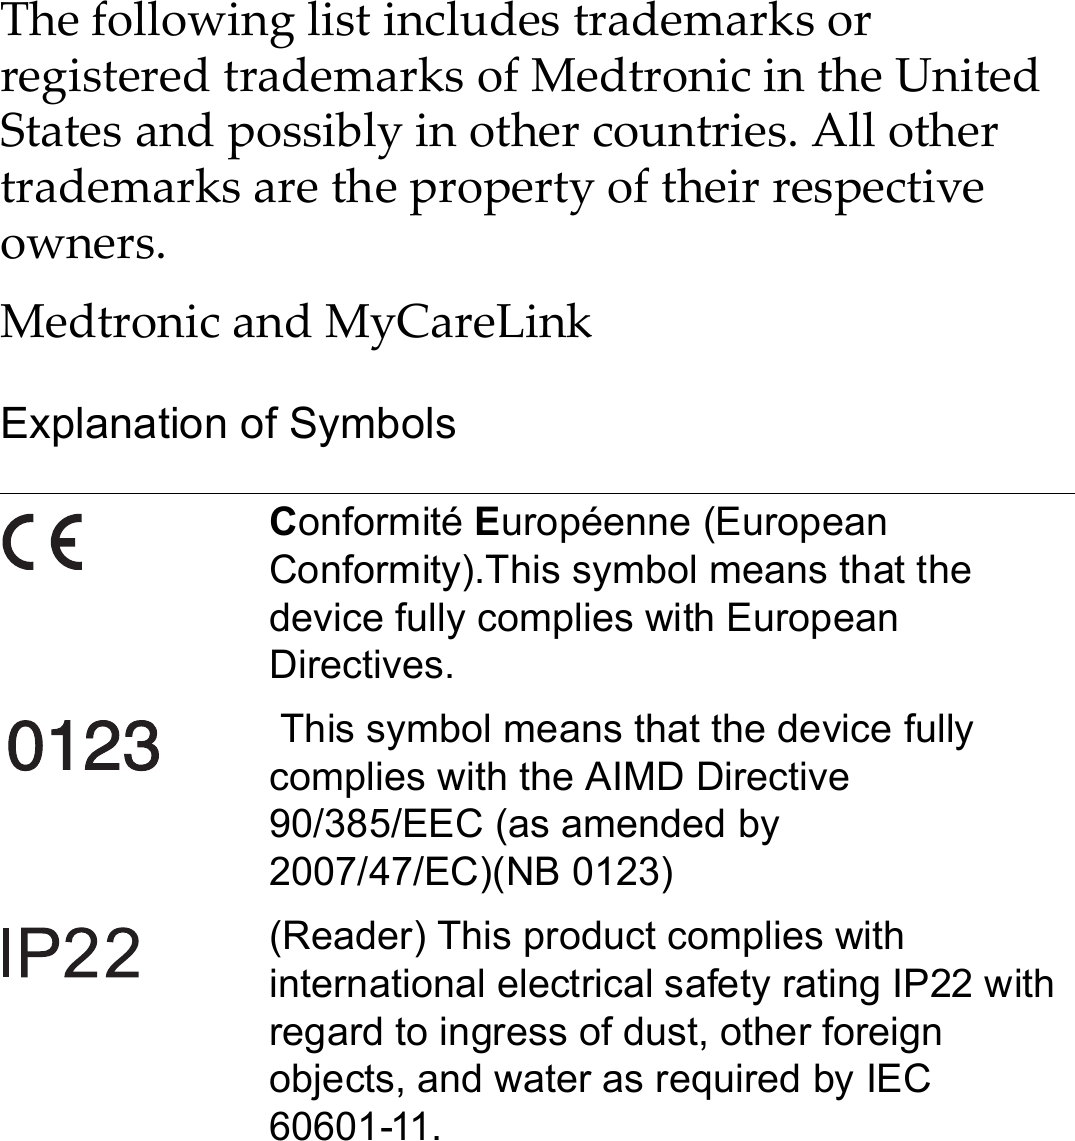 The following list includes trademarks or registered trademarks of Medtronic in the United States and possibly in other countries. All other trademarks are the property of their respective owners.Medtronic and MyCareLinkExplanation of SymbolsConformité Européenne (European Conformity).This symbol means that the device fully complies with European Directives. This symbol means that the device fully complies with the AIMD Directive 90/385/EEC (as amended by 2007/47/EC)(NB 0123)(Reader) This product complies with international electrical safety rating IP22 with regard to ingress of dust, other foreign objects, and water as required by IEC 60601-11.